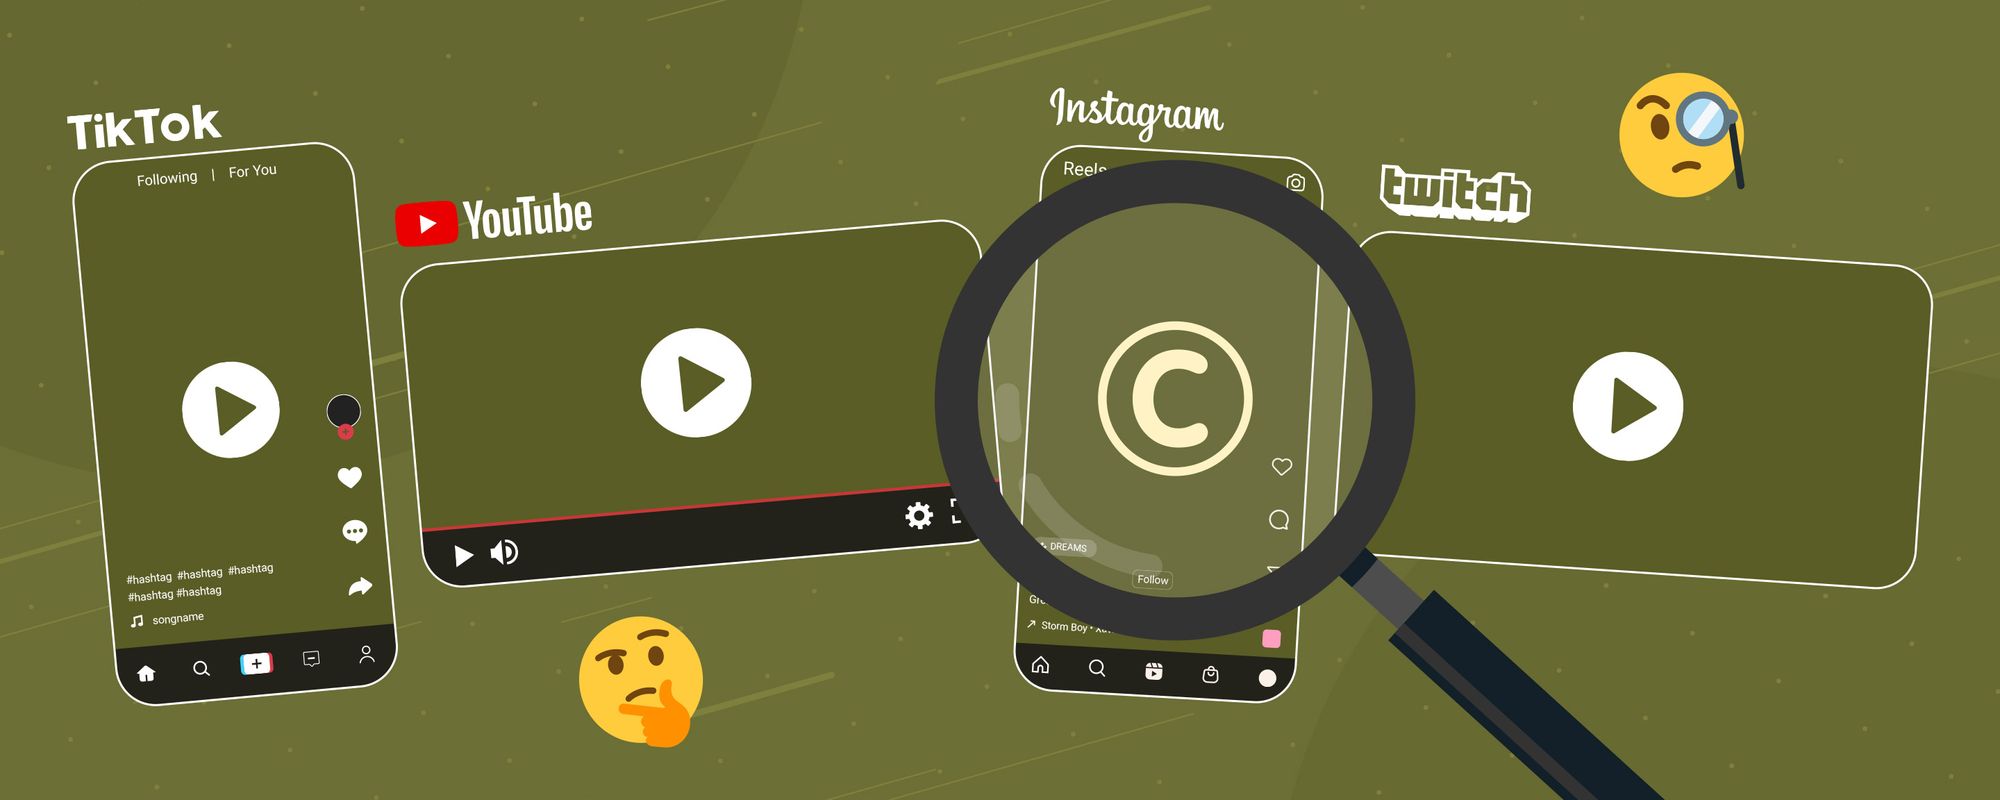 Images of different video platforms with a magnifying glass showing a copyright symbol to show the functon of the DMCA.